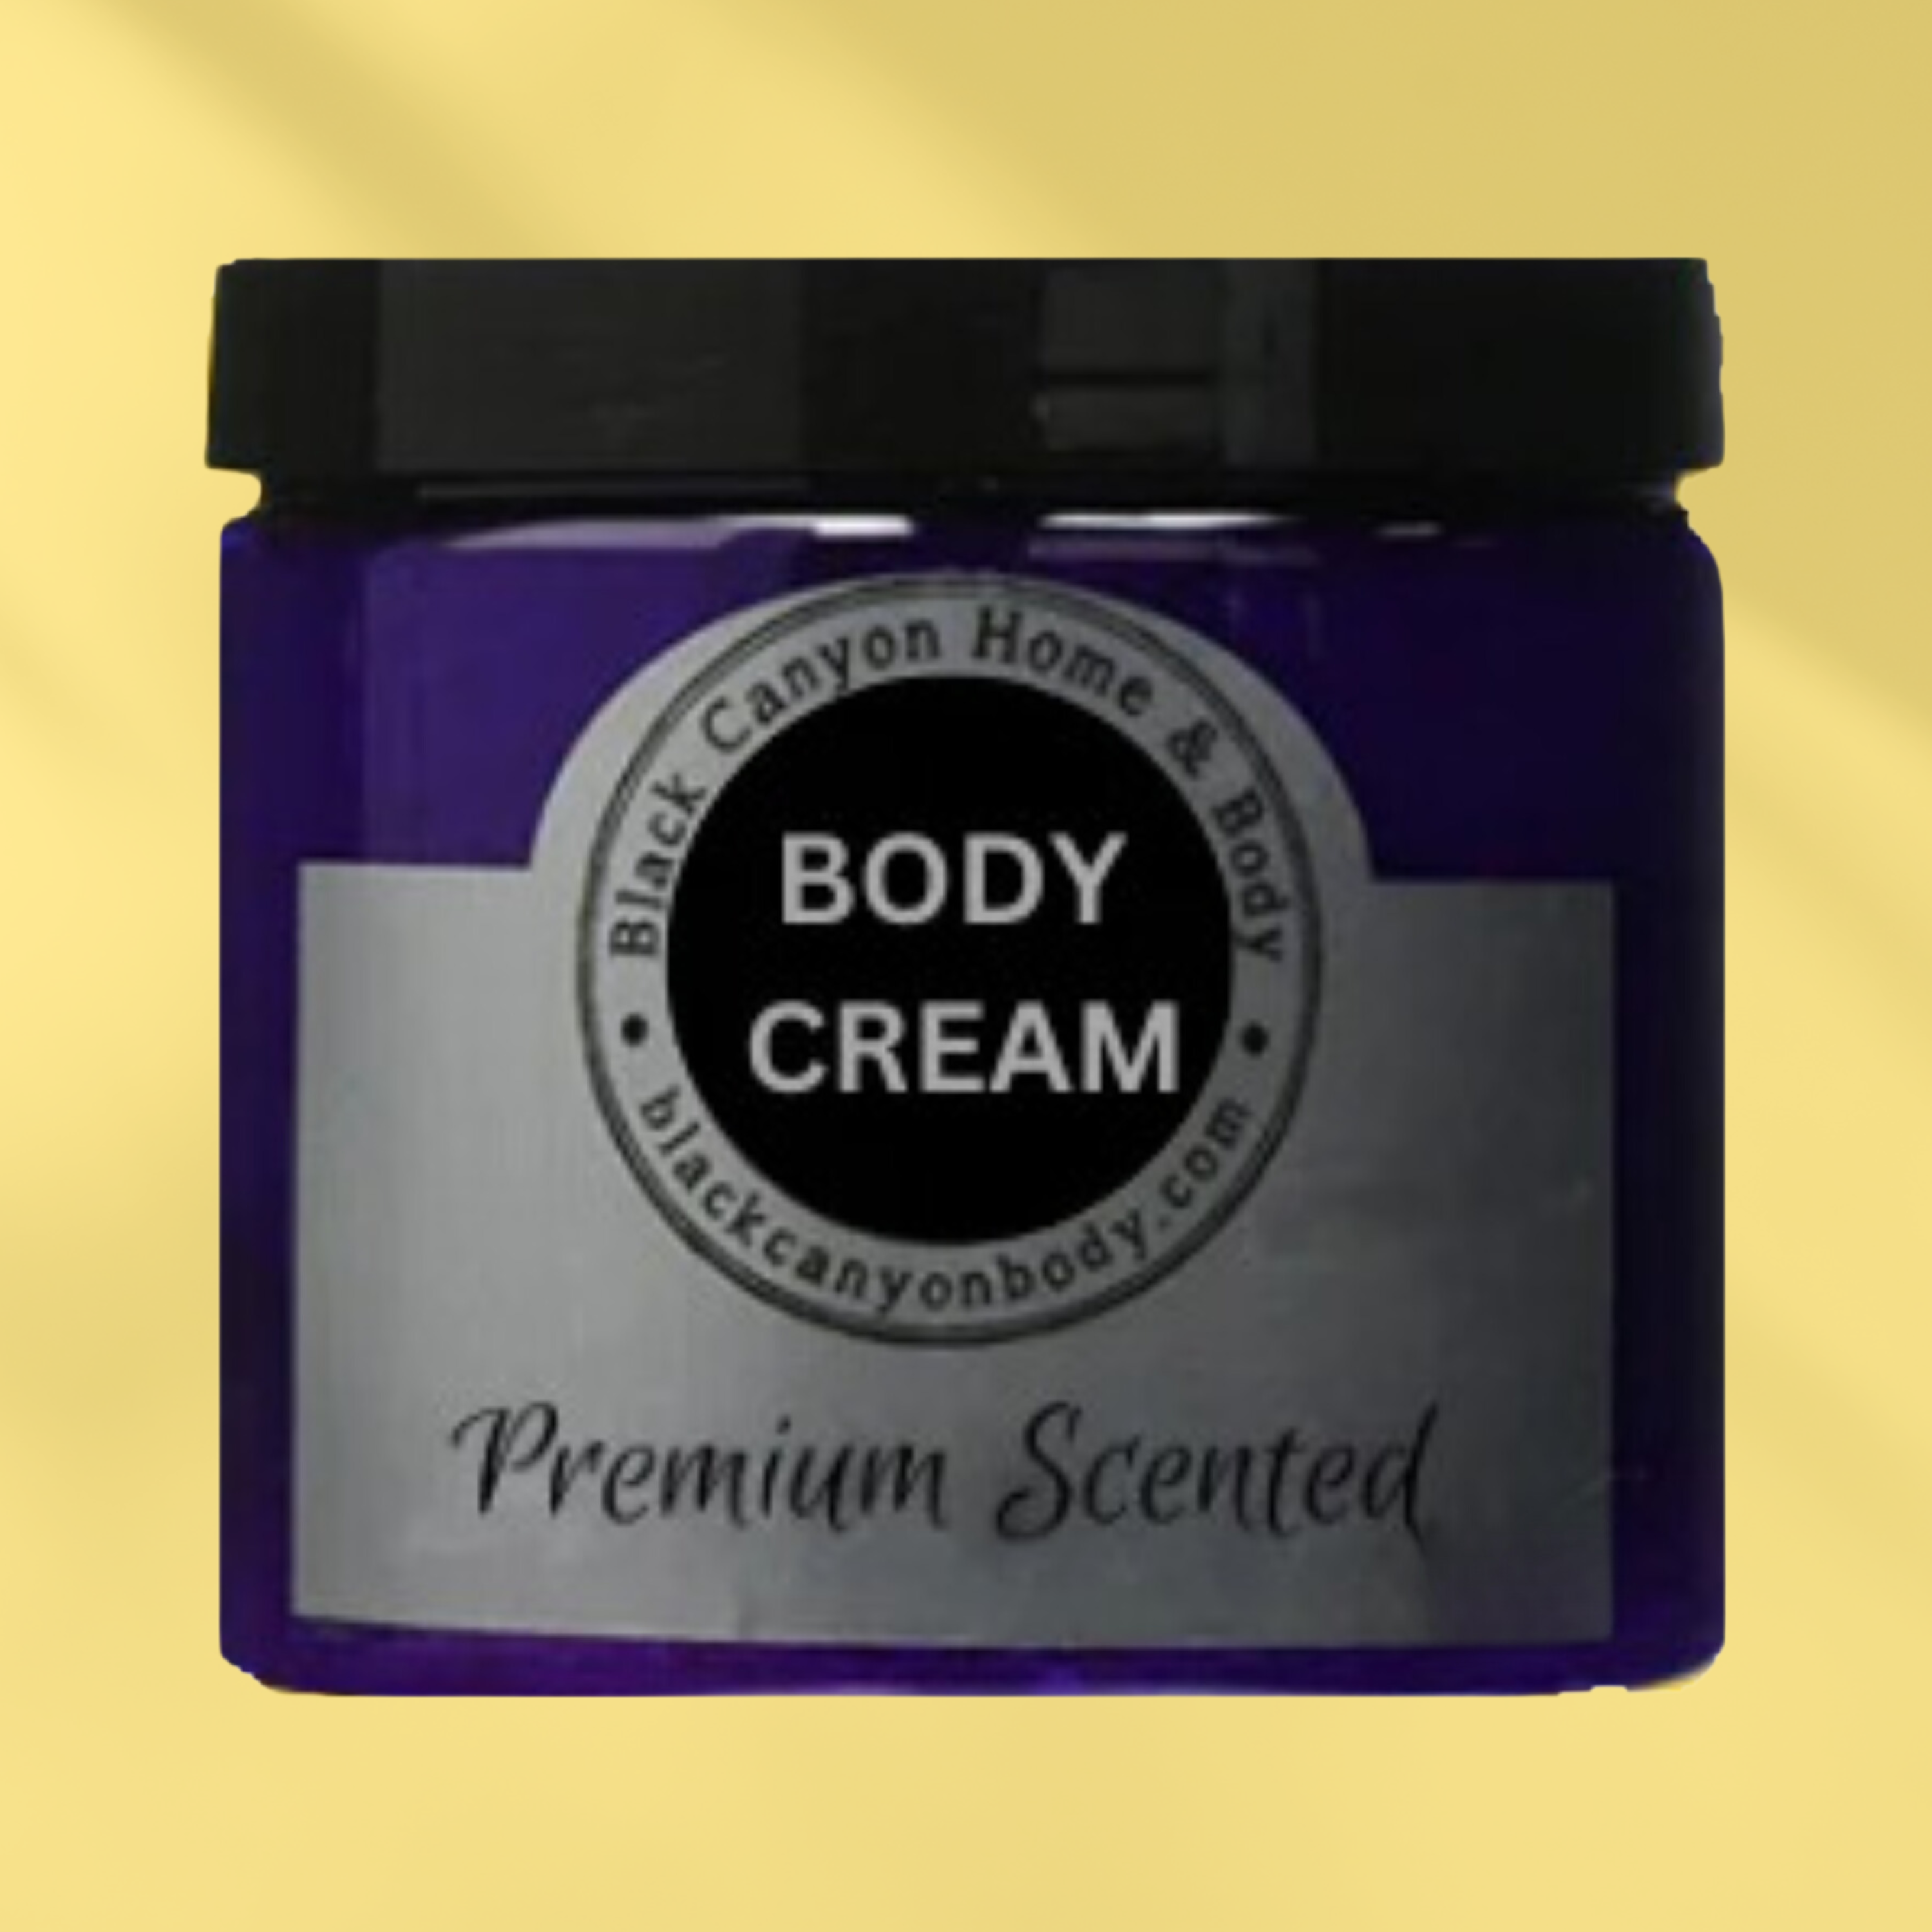 Paydens Cobalt Sapphire Pools Scented Luxury Body Cream with Aloe For Men